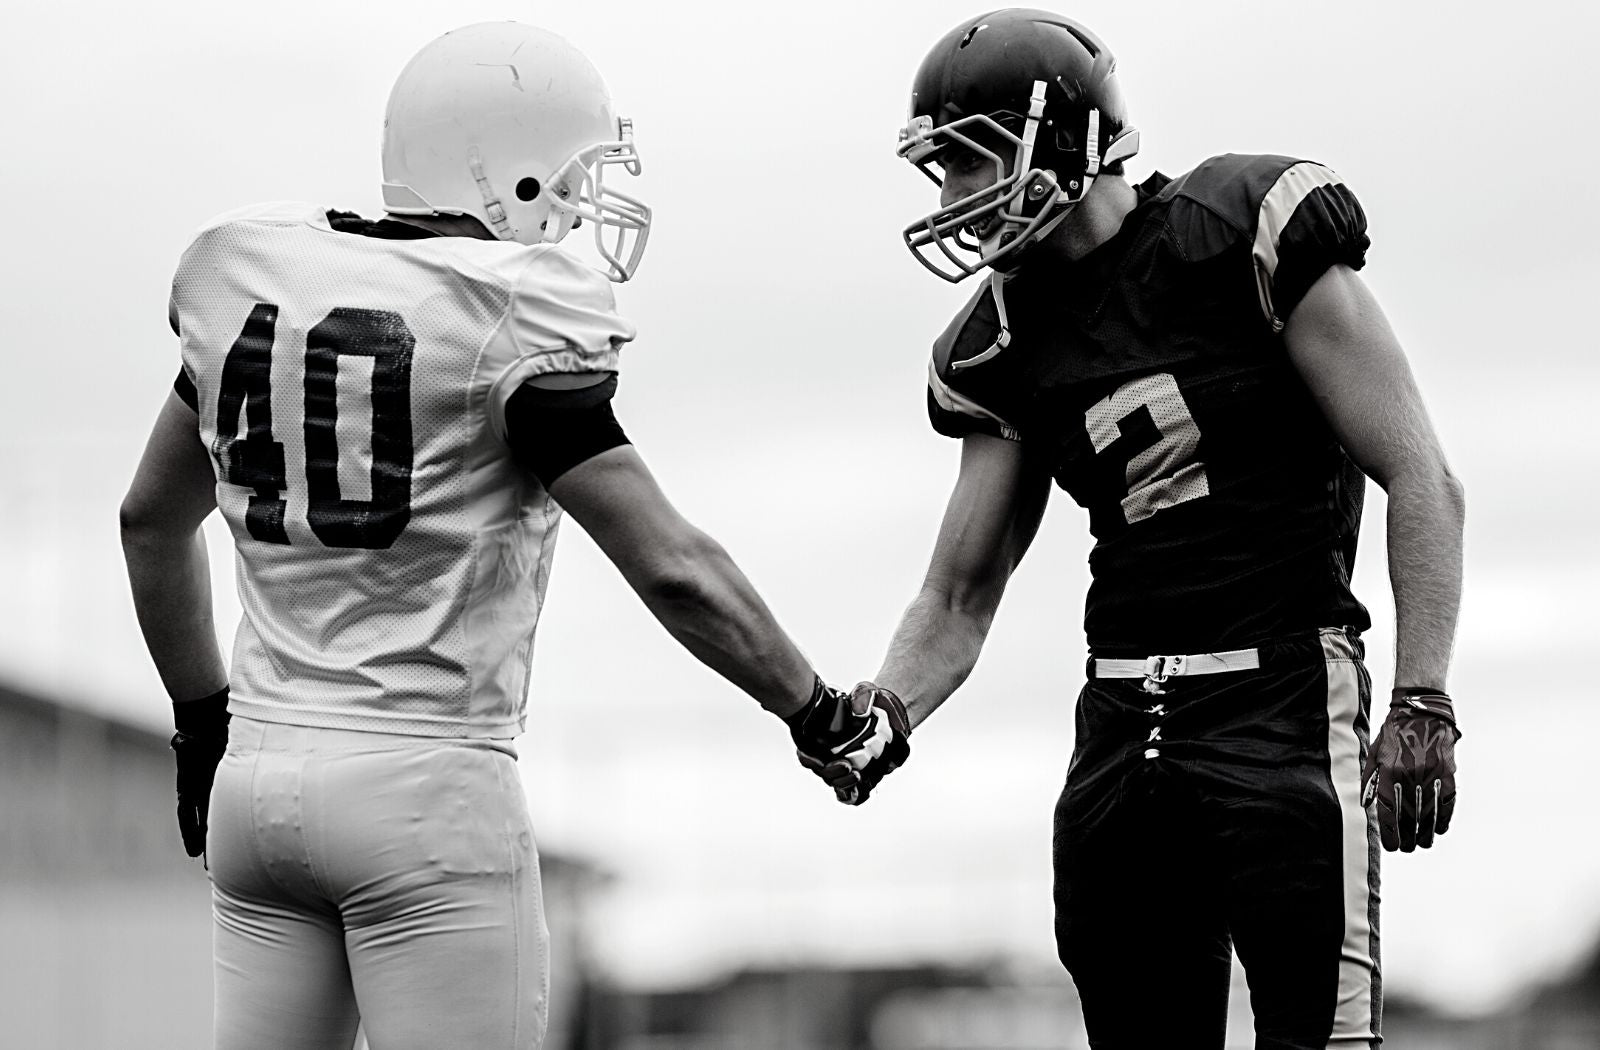 two American football players in uniform being fair person shake hands after playing game